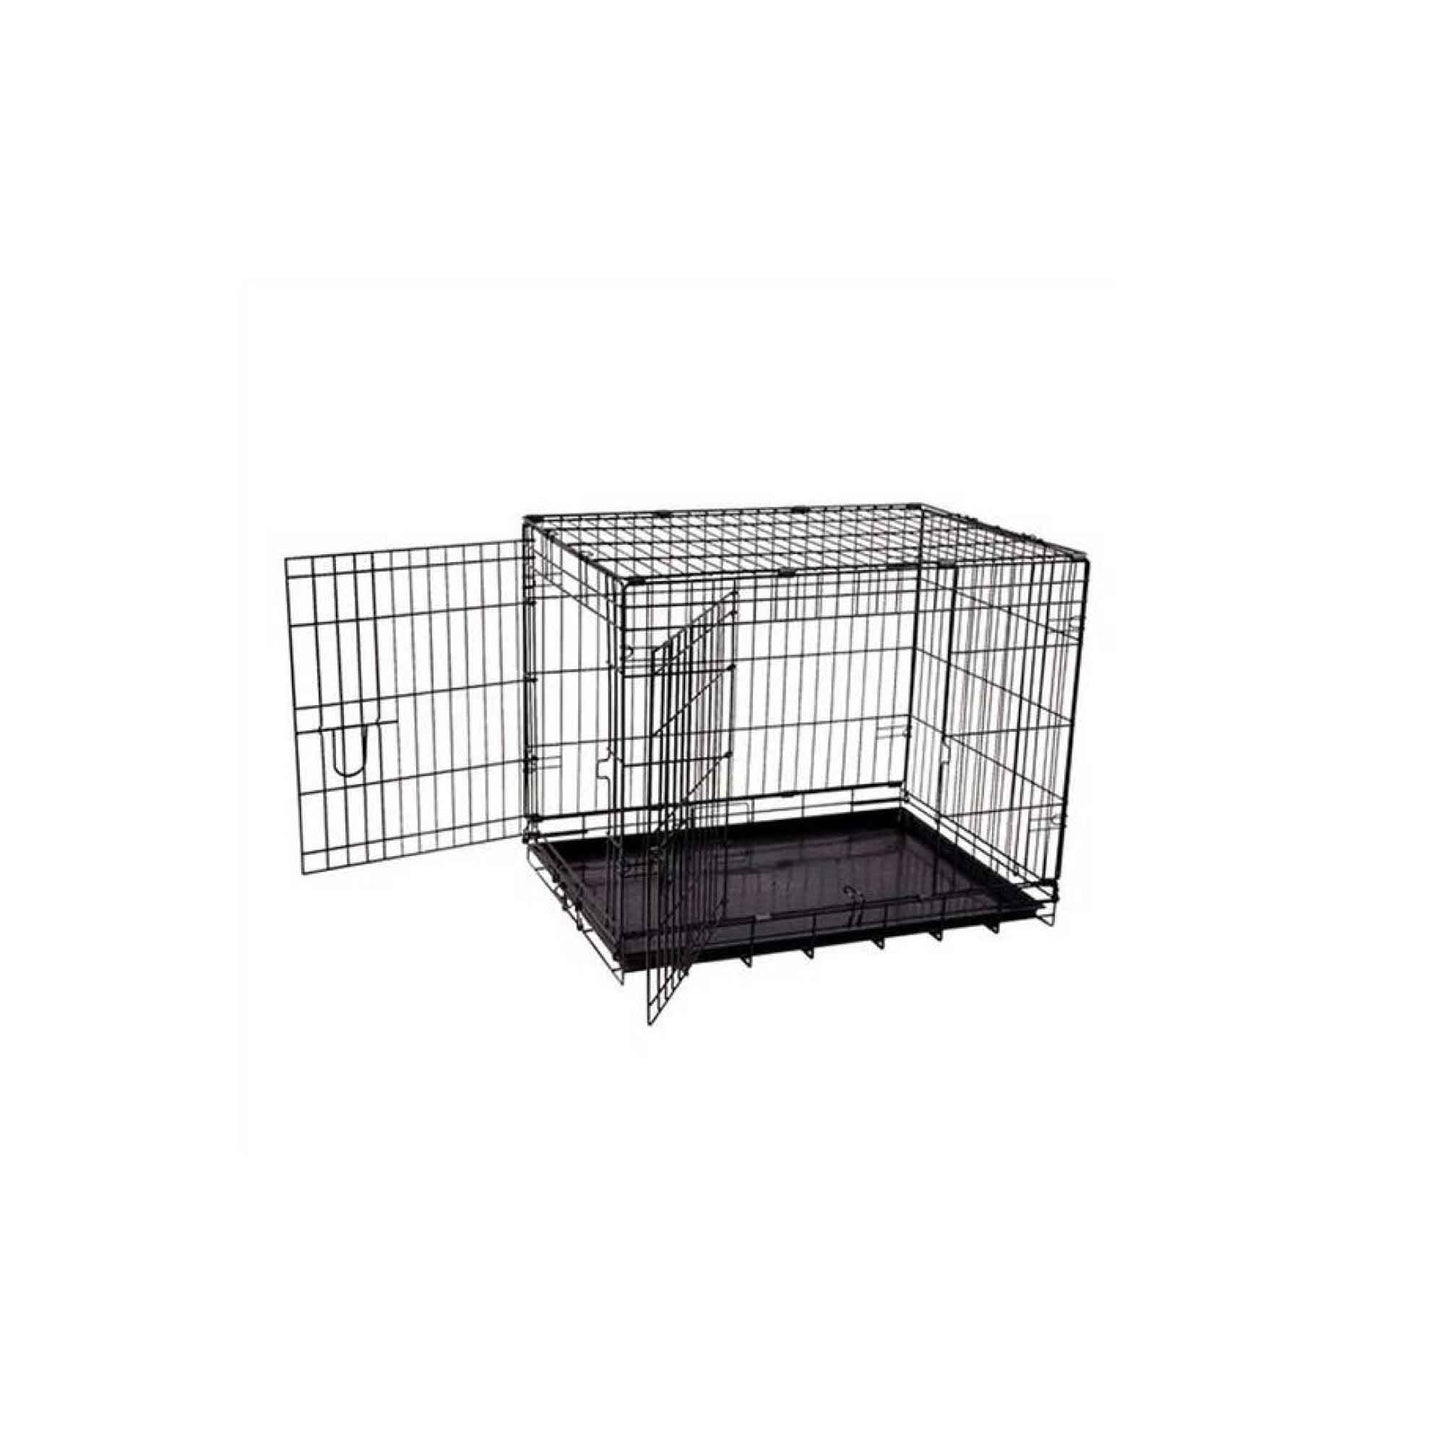 Dog Wire Crate - Portable Collapsible Travel Kennel - Pet Puppy Cage